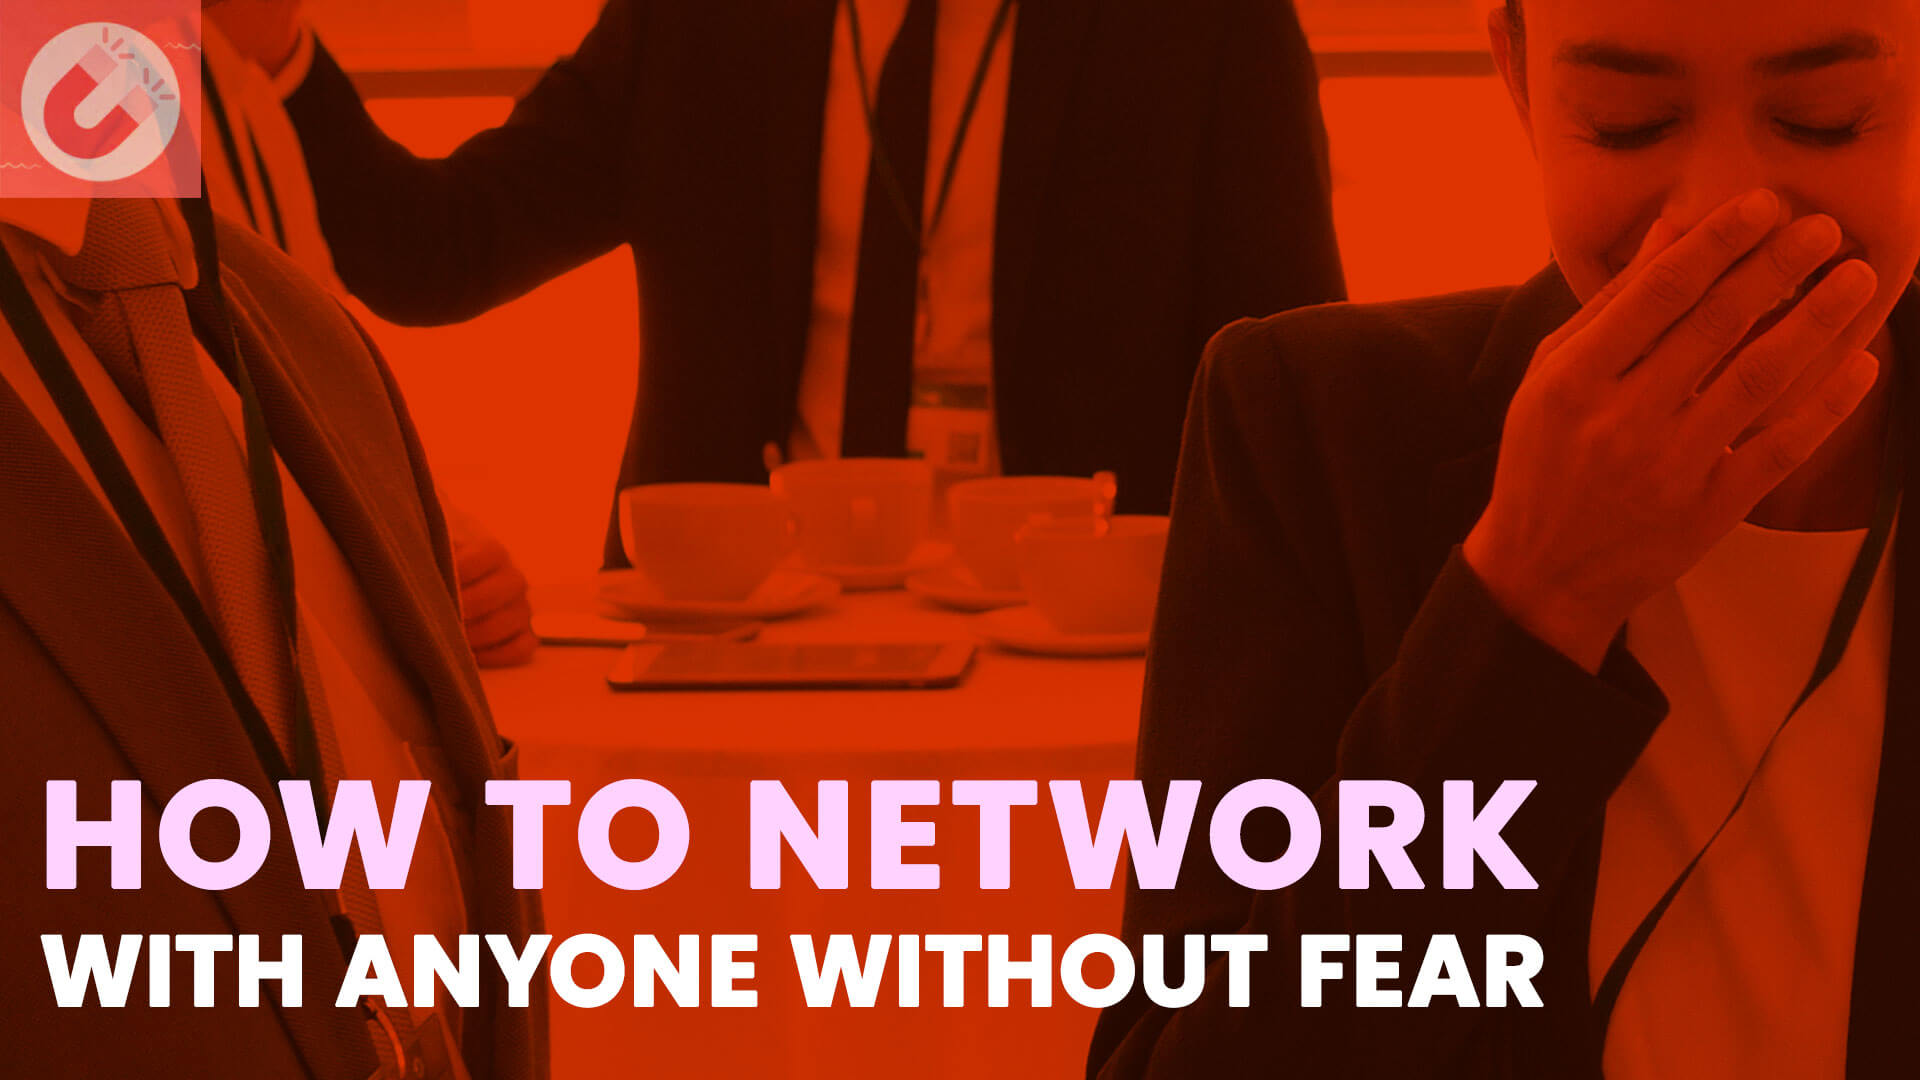 Overcome social anxiety and learn how to network with anyone